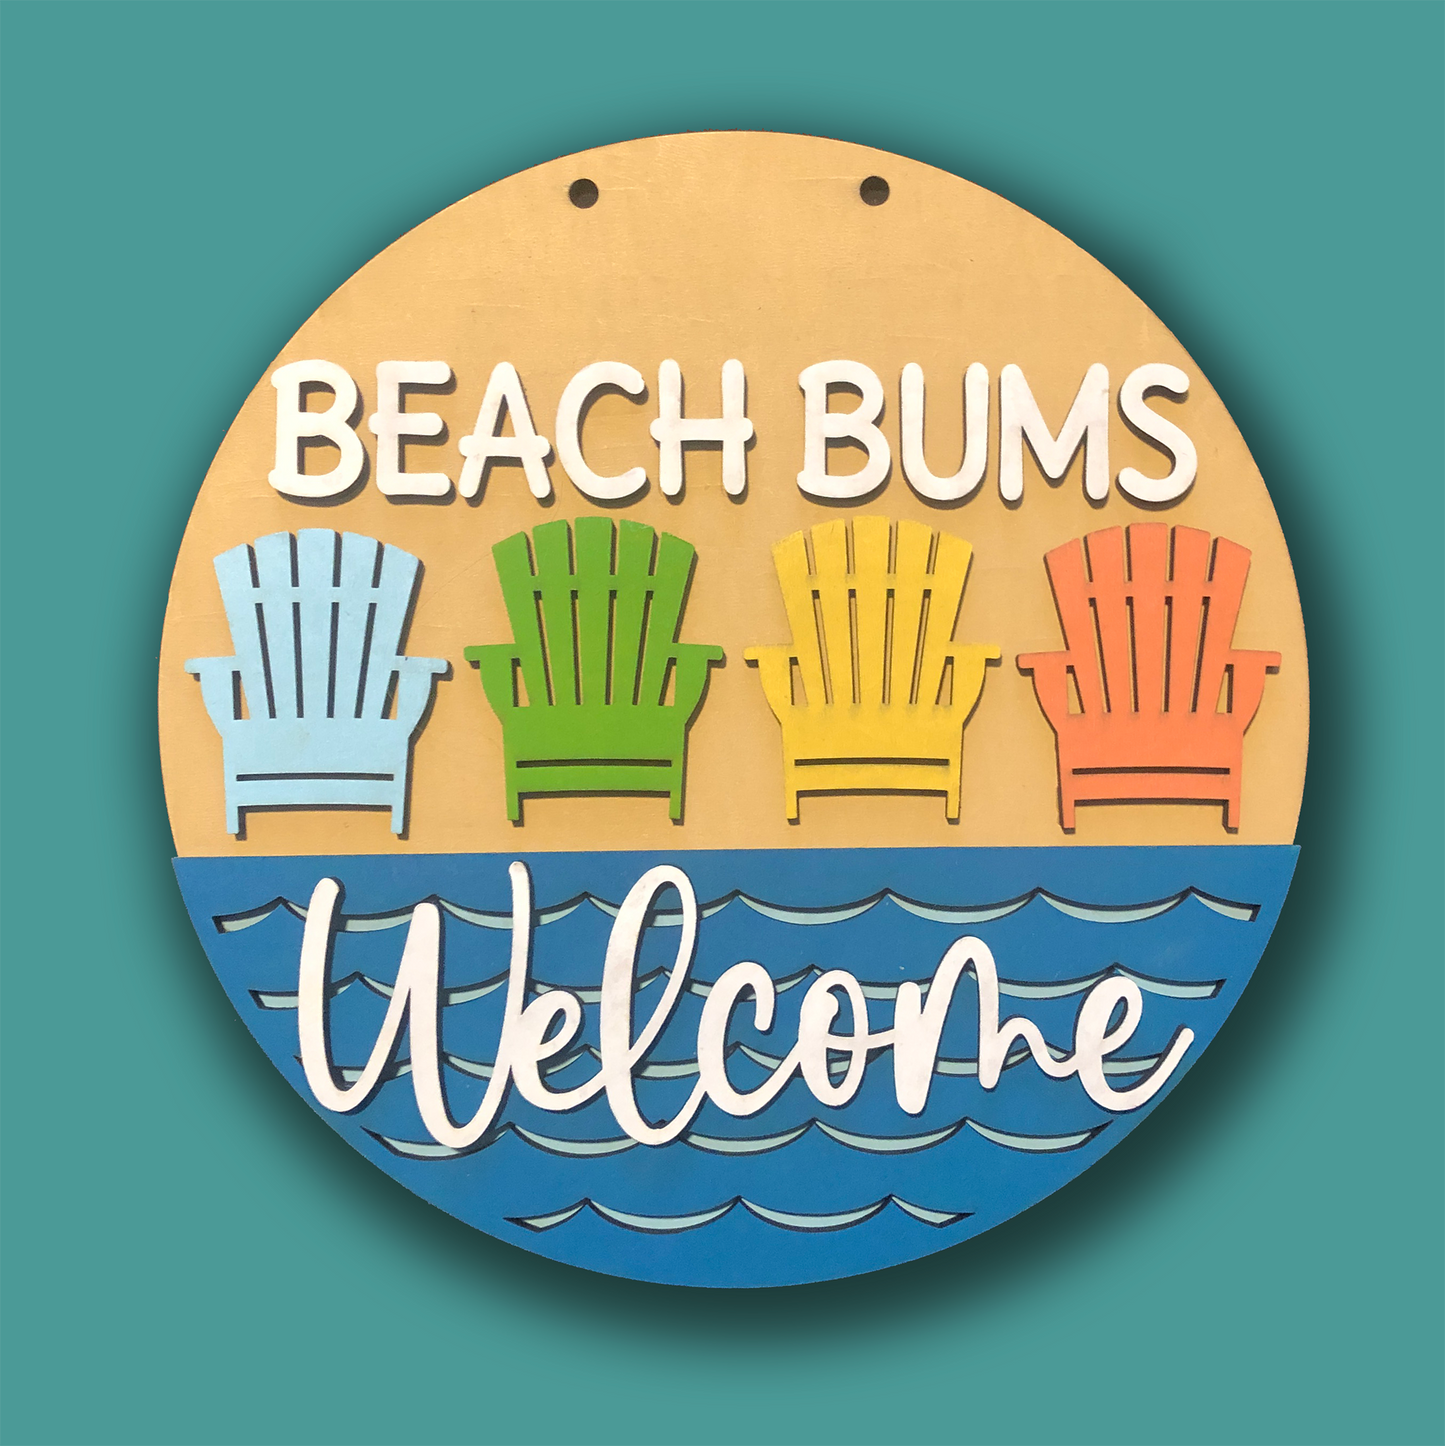 Beach Bums sign with 3D layered effect